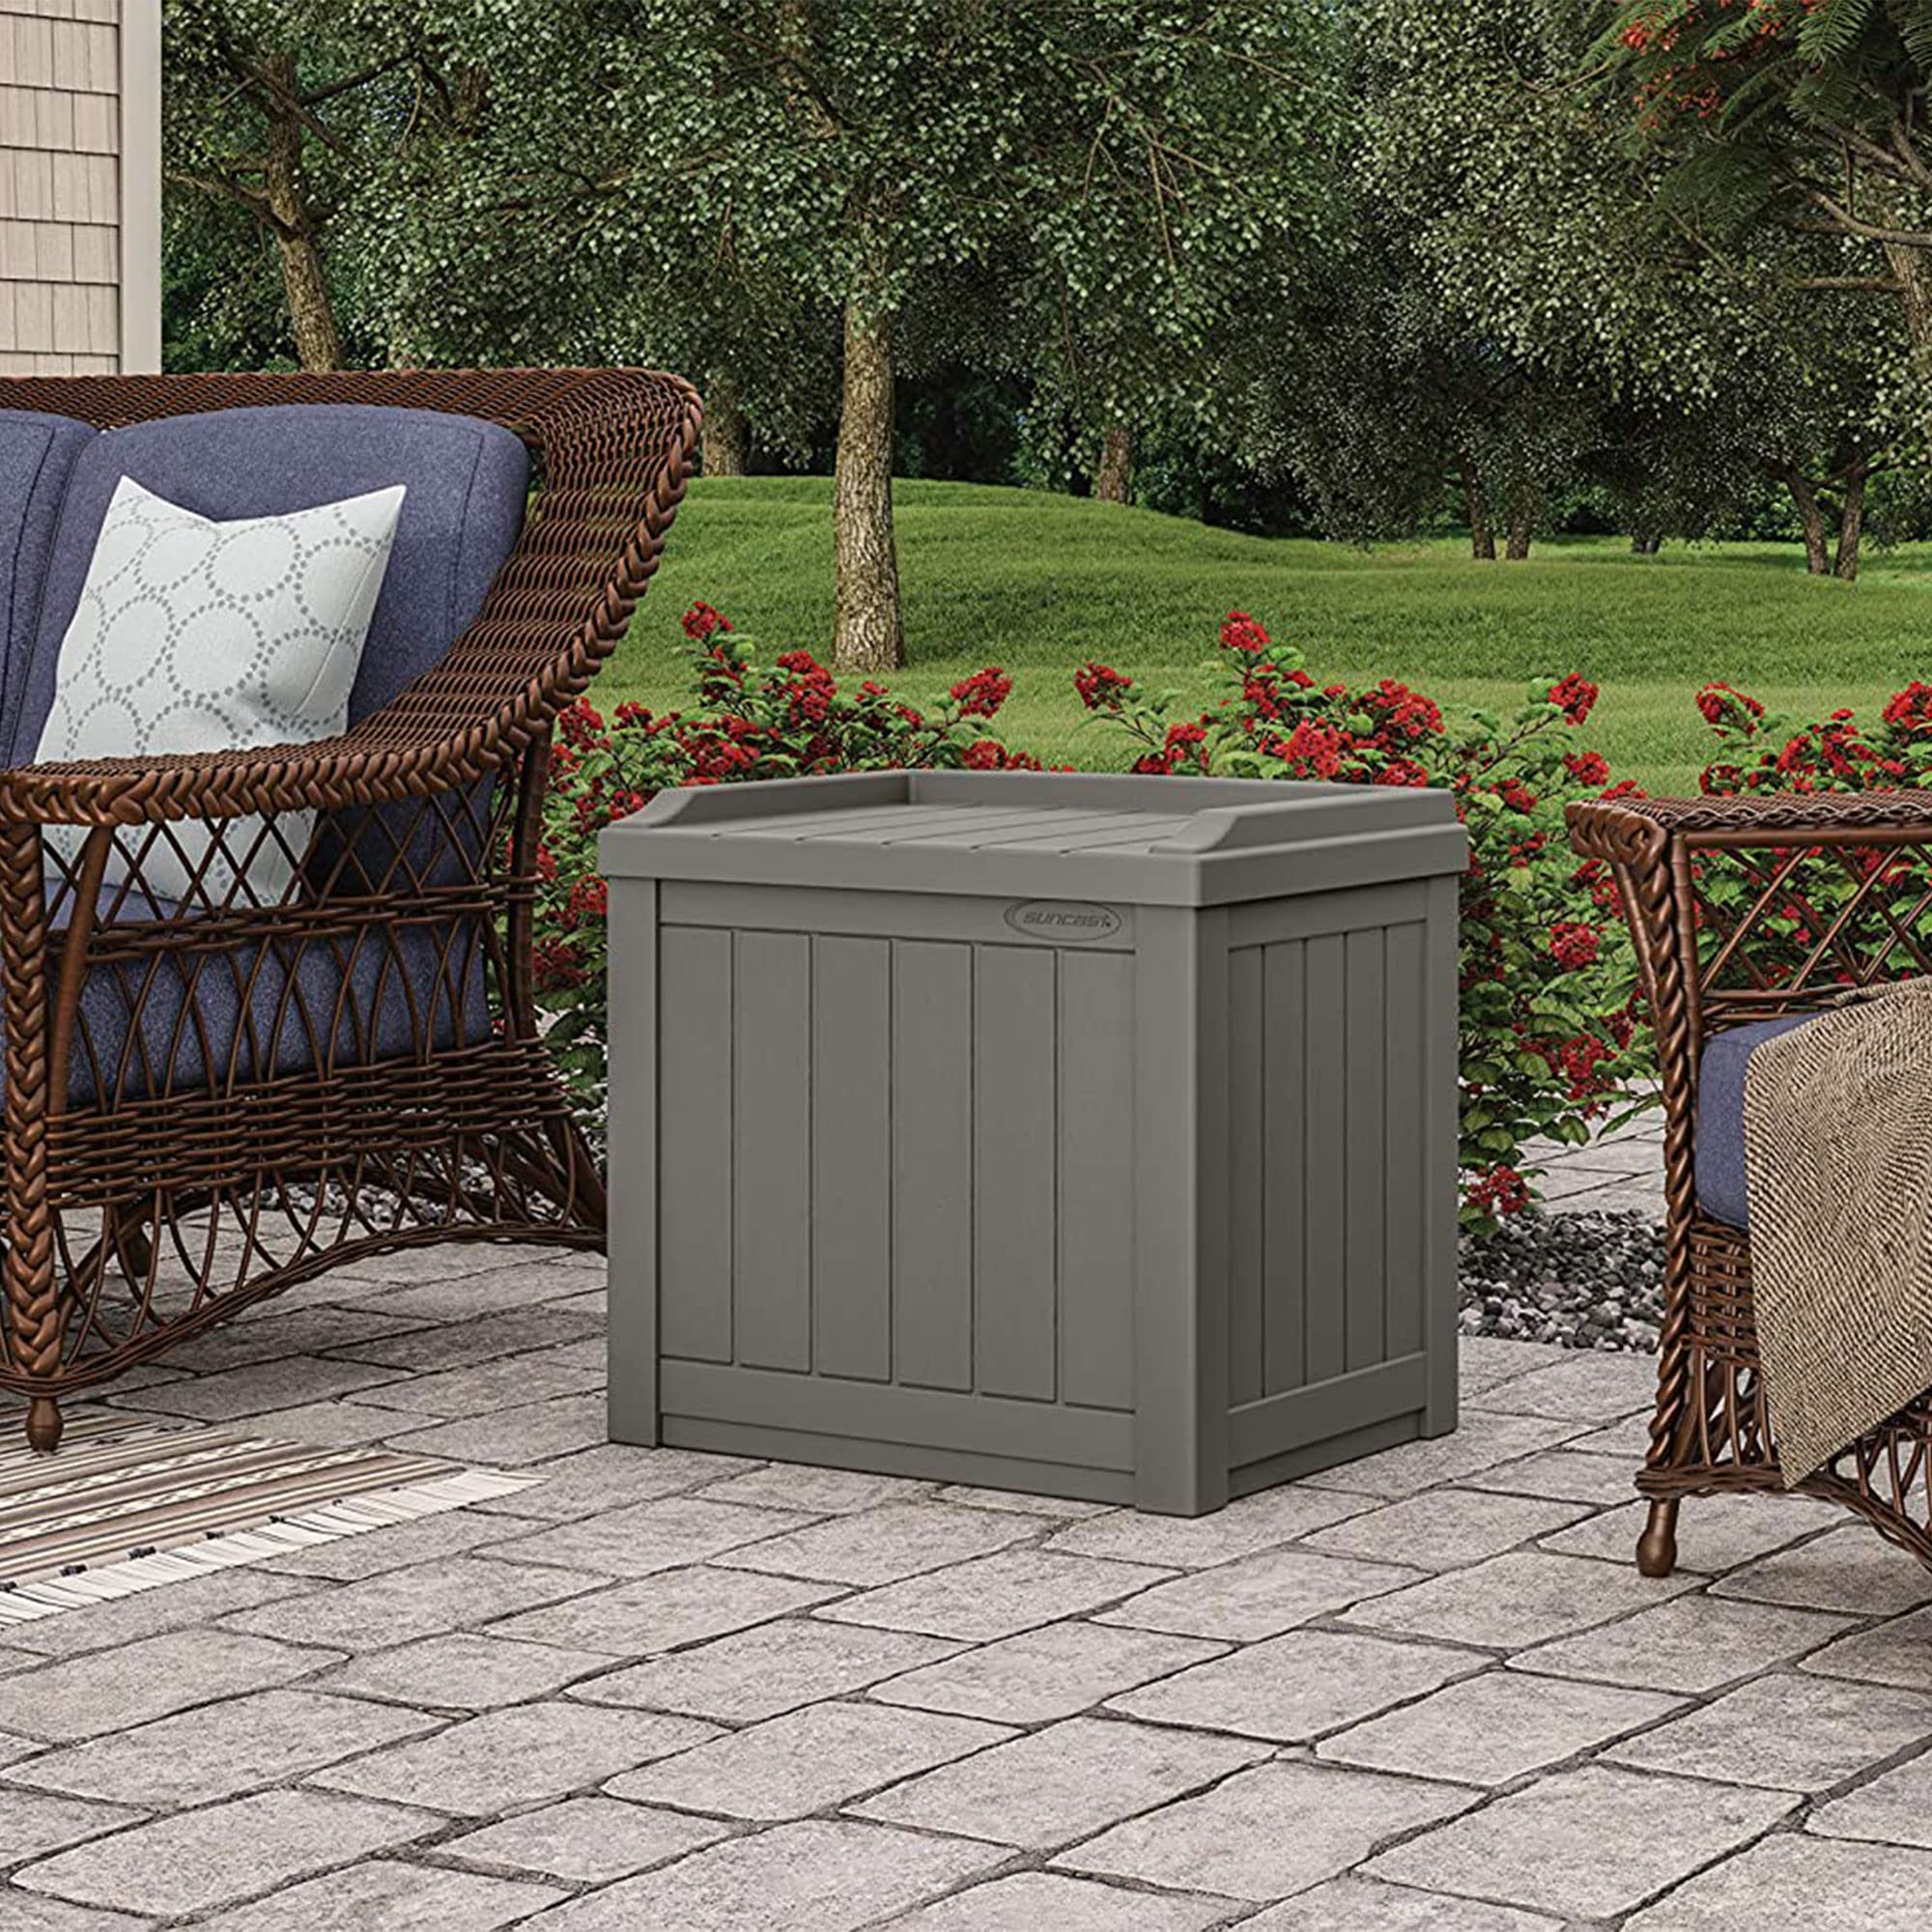 Suncast 22 Gallon Indoor or Outdoor Backyard Patio Small Storage Deck Box with Attractive Bench Seat and Reinforced Lid, Stone (2 Pack)